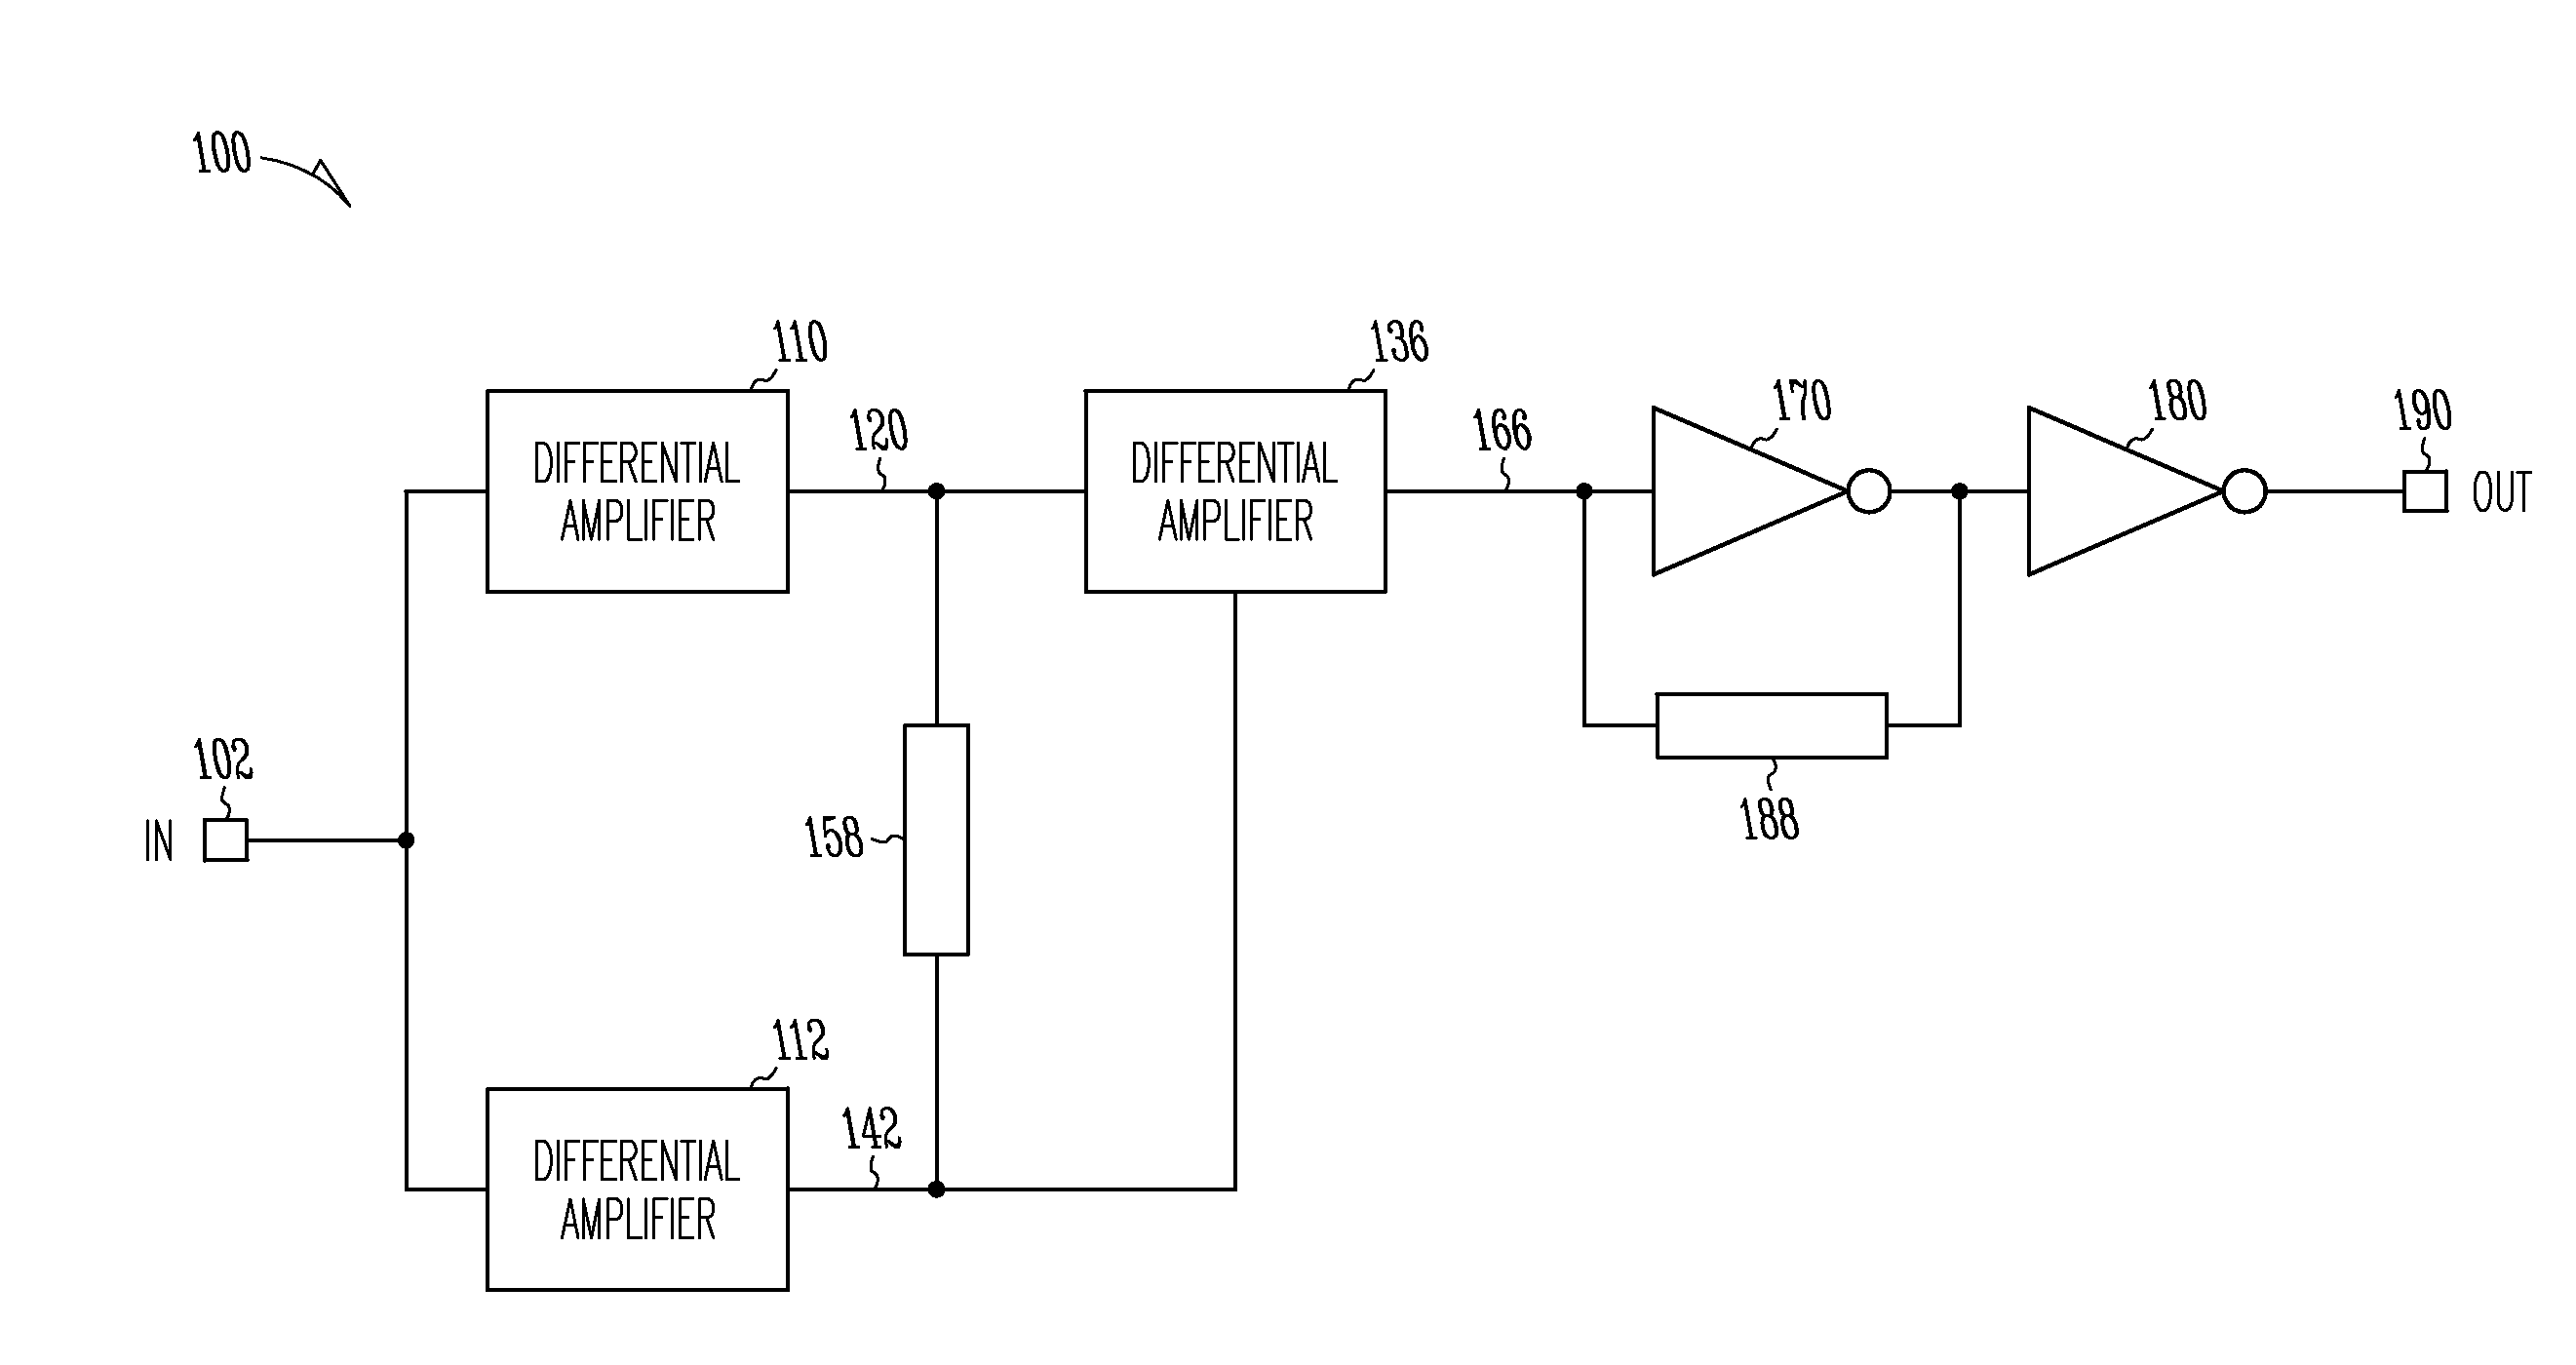 Input buffer apparatuses and methods